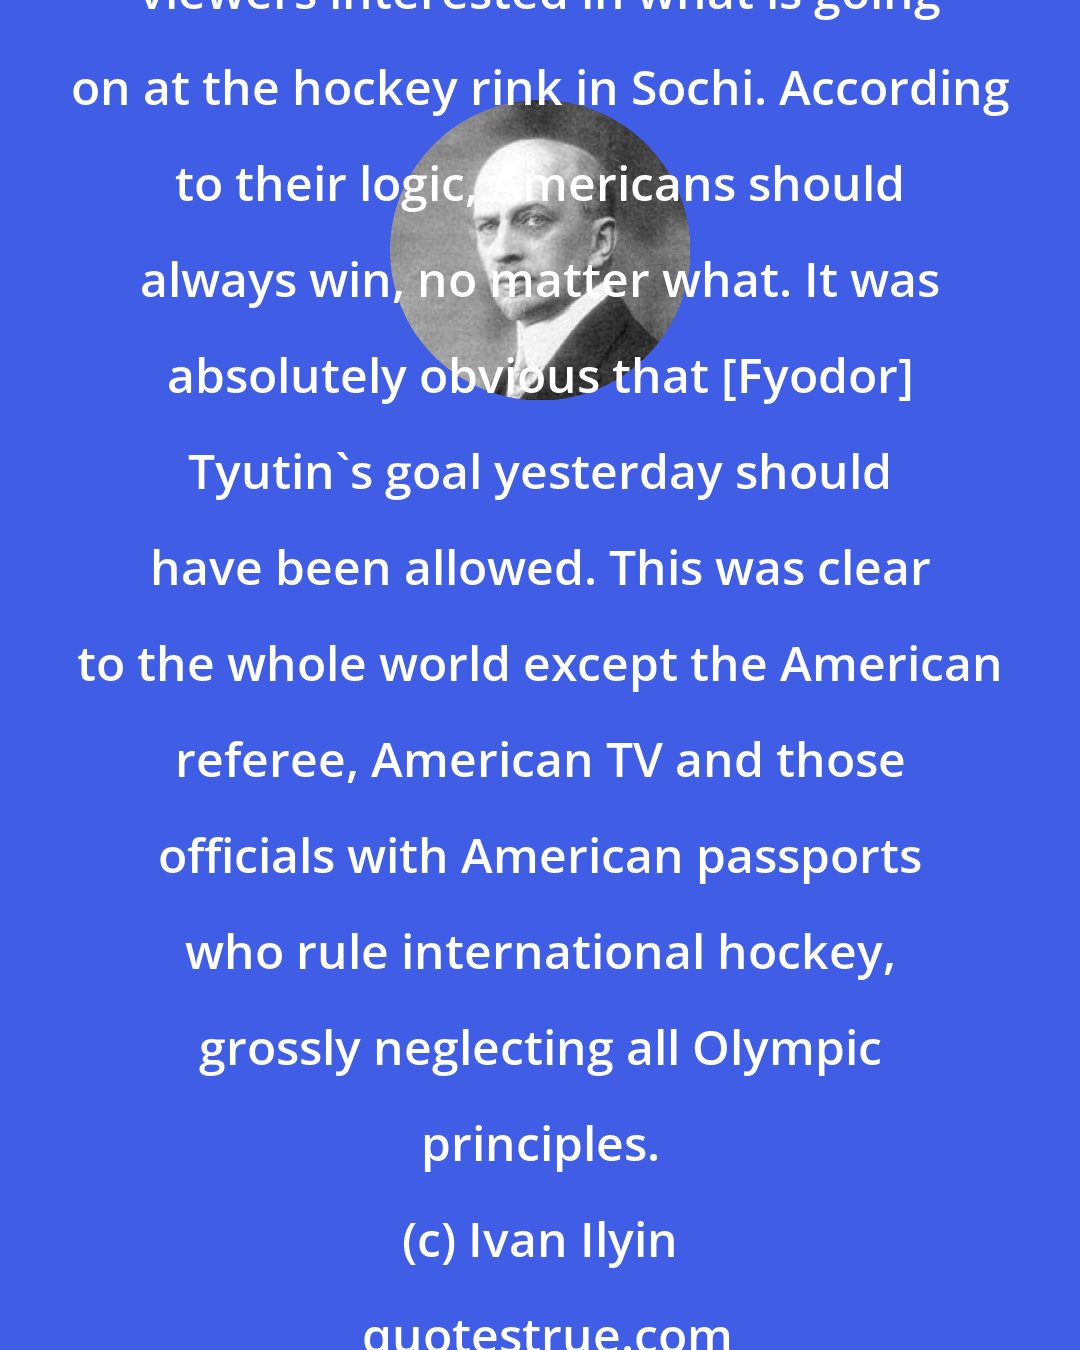 Ivan Ilyin: The whole world knows that American TV companies have monopolized Olympic broadcasts and in order to please the fans in their country they do everything they can to keep American viewers interested in what is going on at the hockey rink in Sochi. According to their logic, Americans should always win, no matter what. It was absolutely obvious that [Fyodor] Tyutin's goal yesterday should have been allowed. This was clear to the whole world except the American referee, American TV and those officials with American passports who rule international hockey, grossly neglecting all Olympic principles.